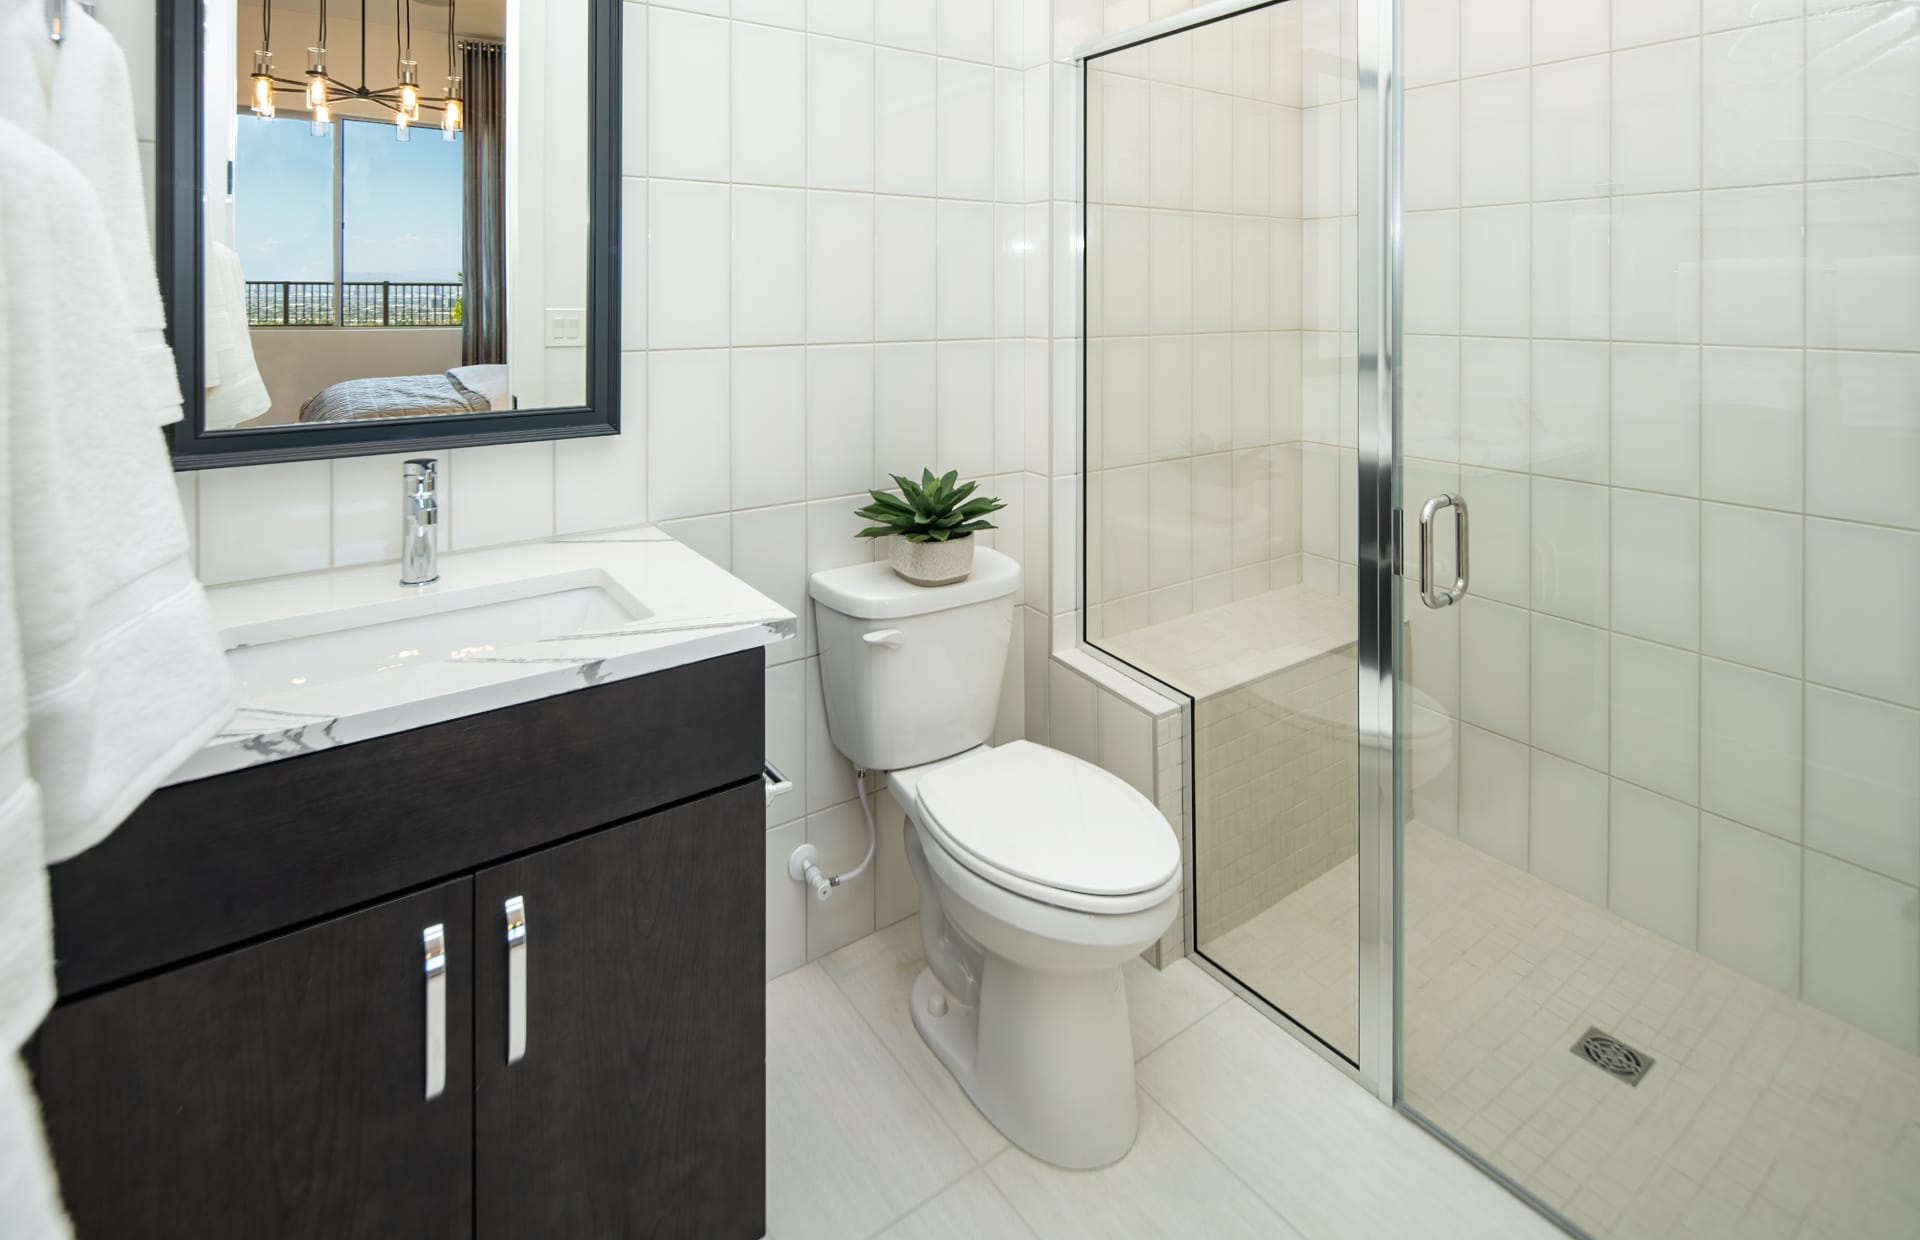 Bathroom of Pesaro Model at Carmel Cliff by Pulte Homes